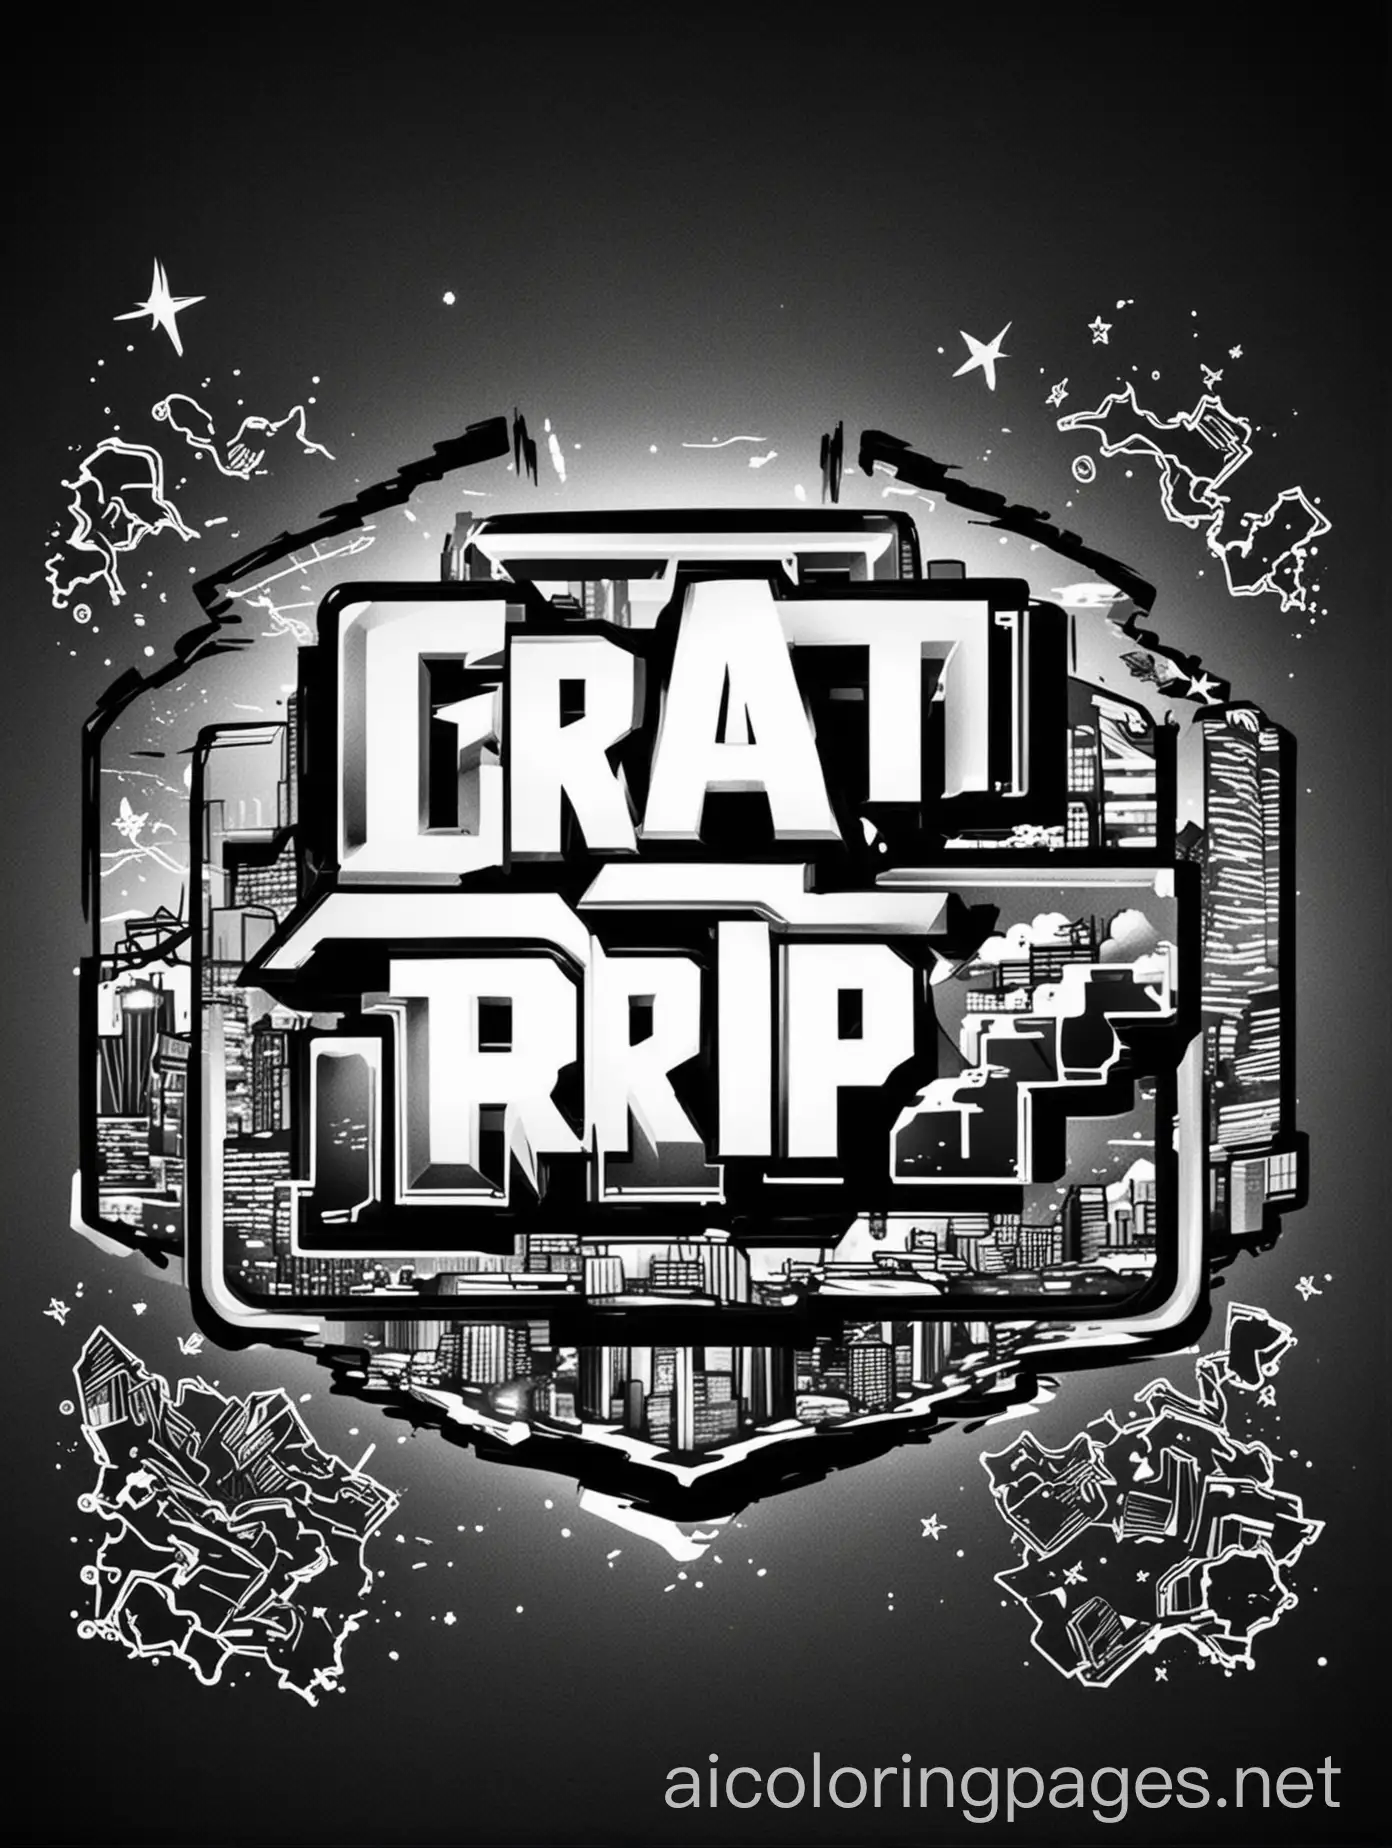 gta rp logo with the night background
, Coloring Page, black and white, line art, white background, Simplicity, Ample White Space. The background of the coloring page is plain white to make it easy for young children to color within the lines. The outlines of all the subjects are easy to distinguish, making it simple for kids to color without too much difficulty